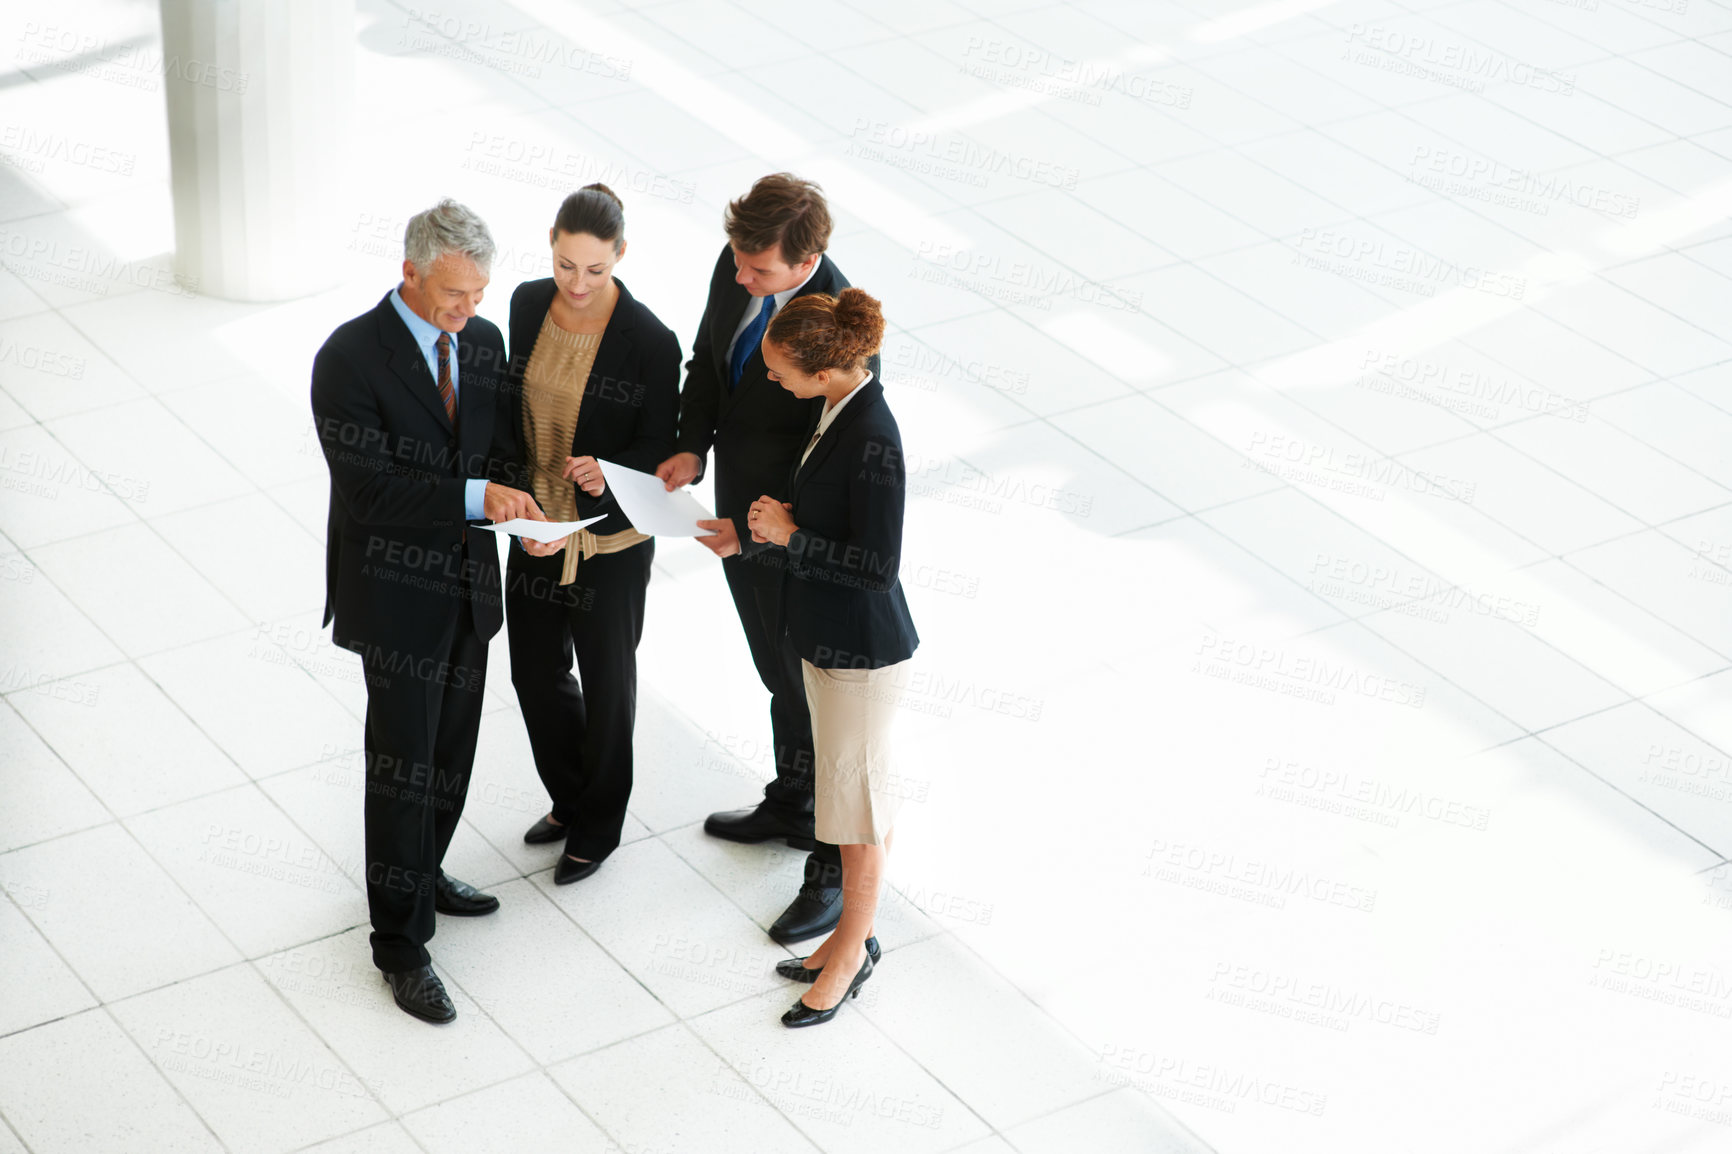 Buy stock photo High-angle view of a group of businesspeople discussing paperwork in an office lobby